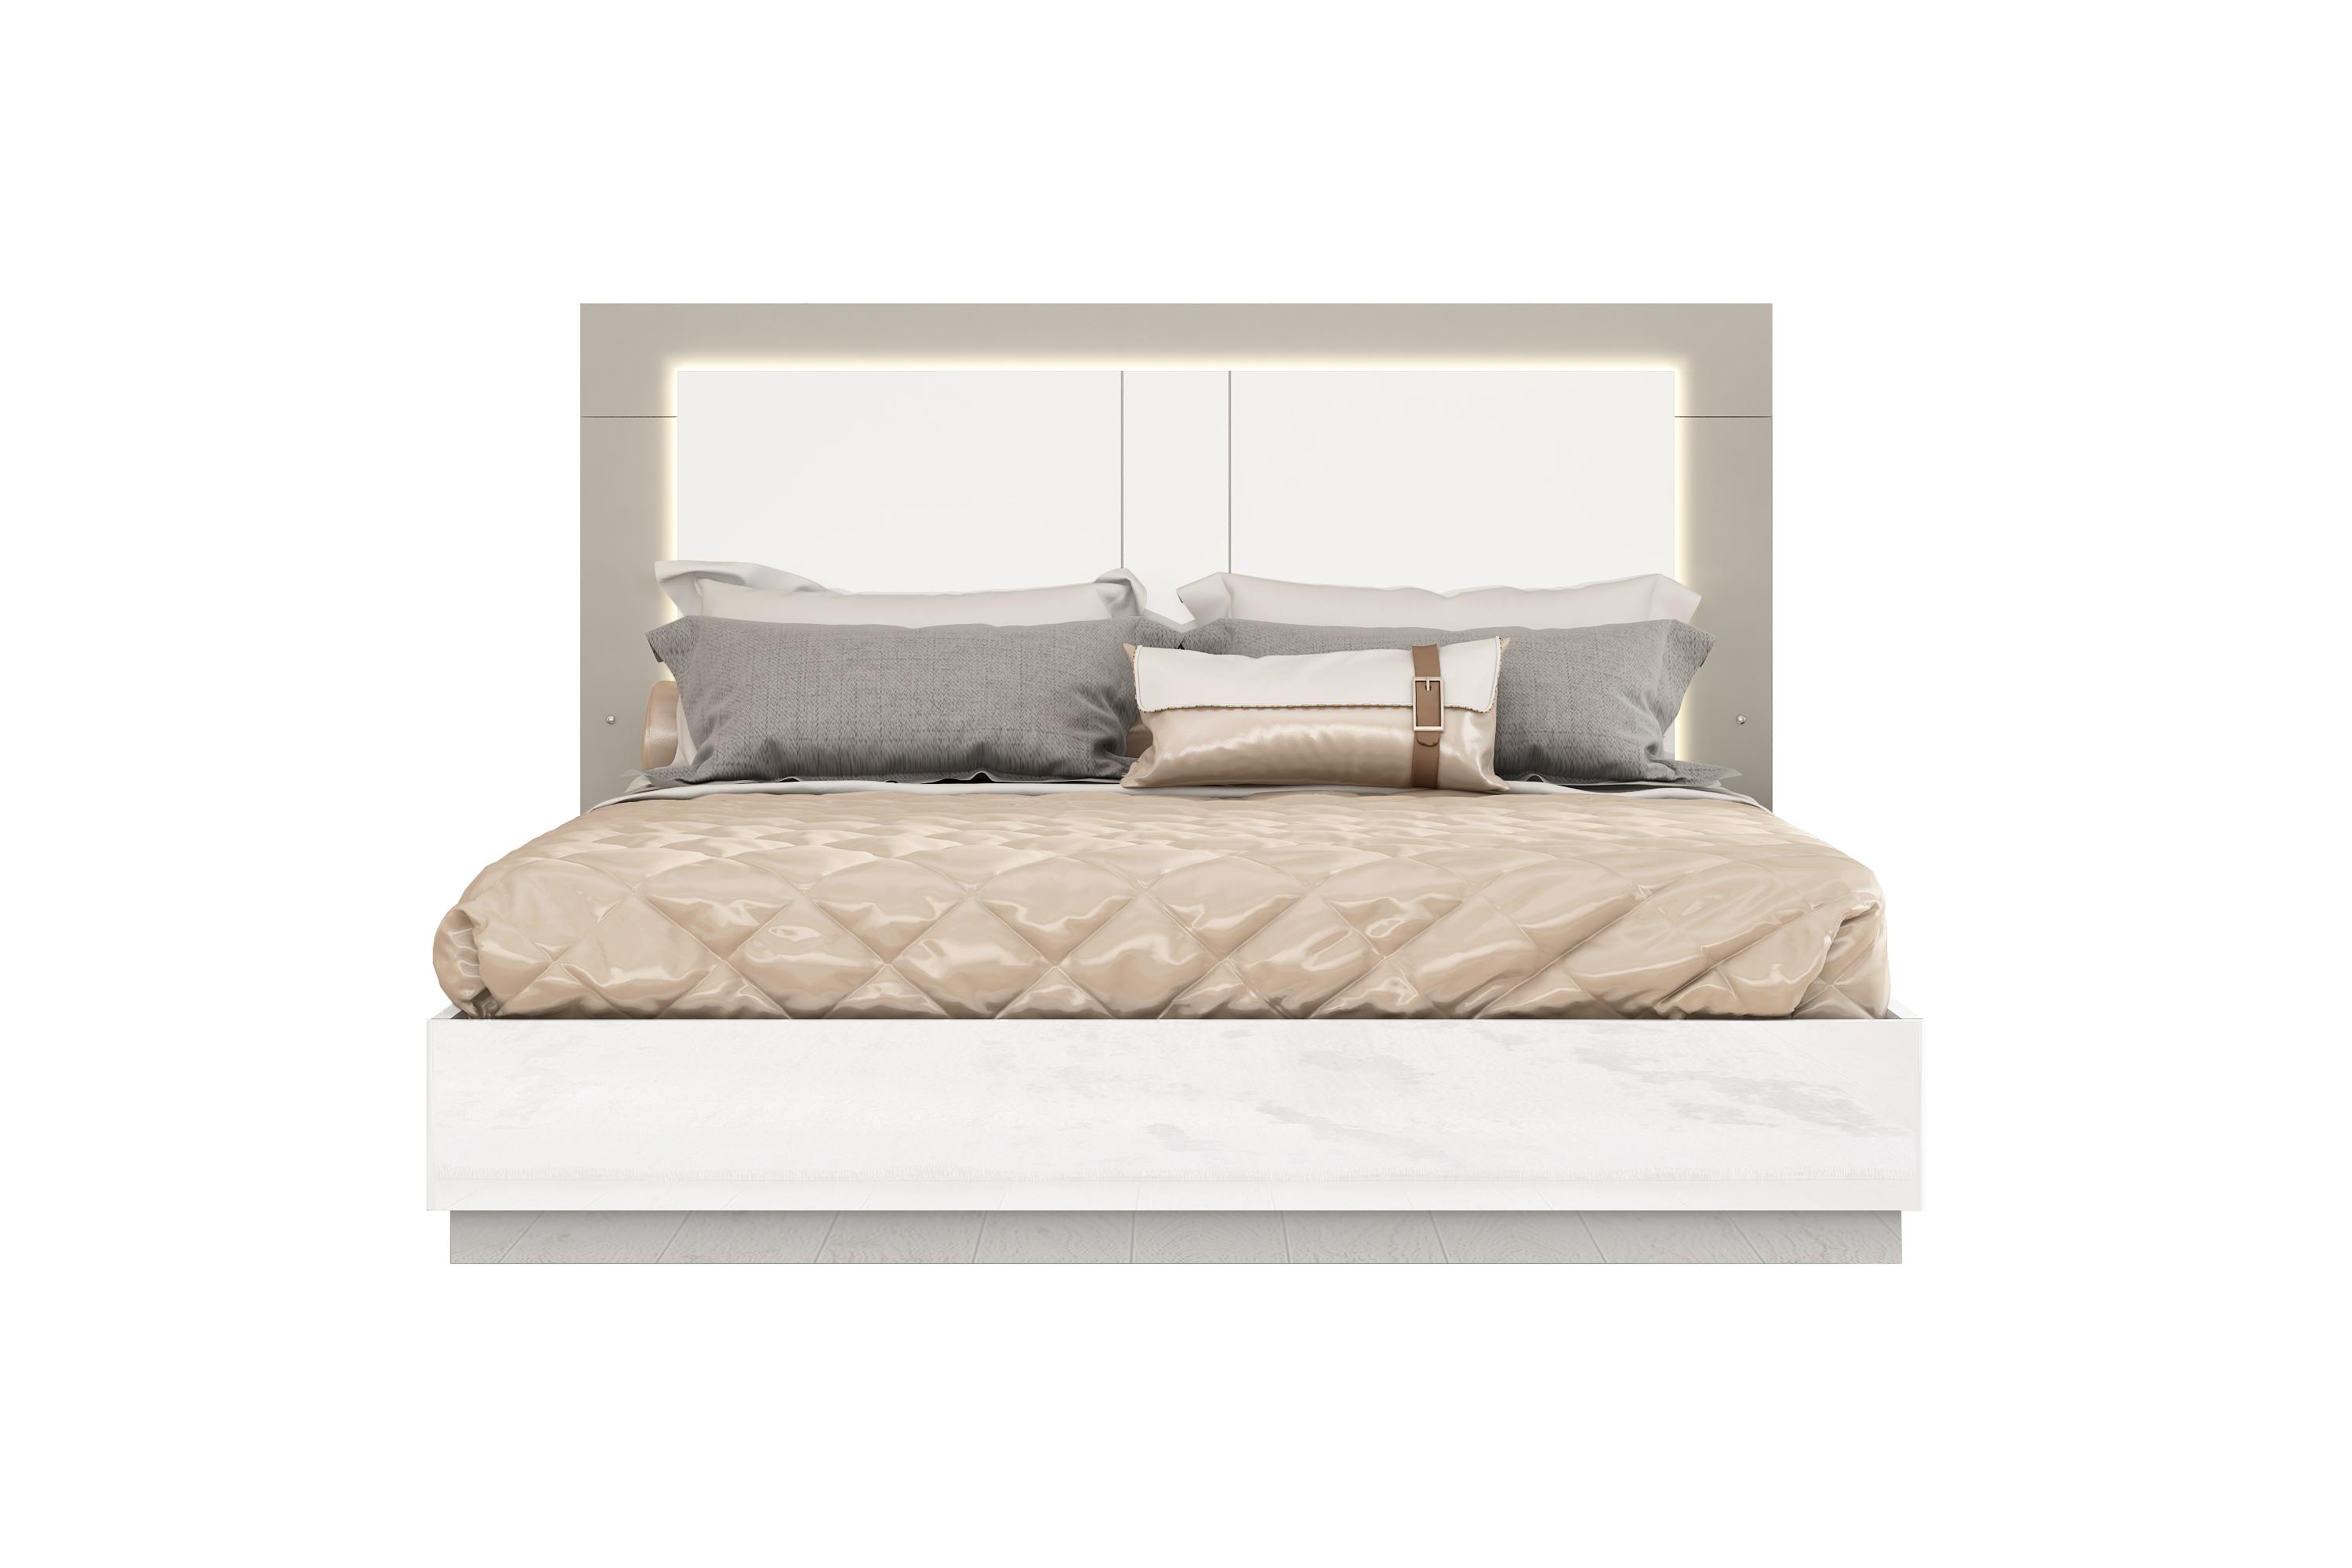 

    
Contemporary High Gloss White Solid Wood Queen Bed WhiteLine BQ1723-WHT Daisy
